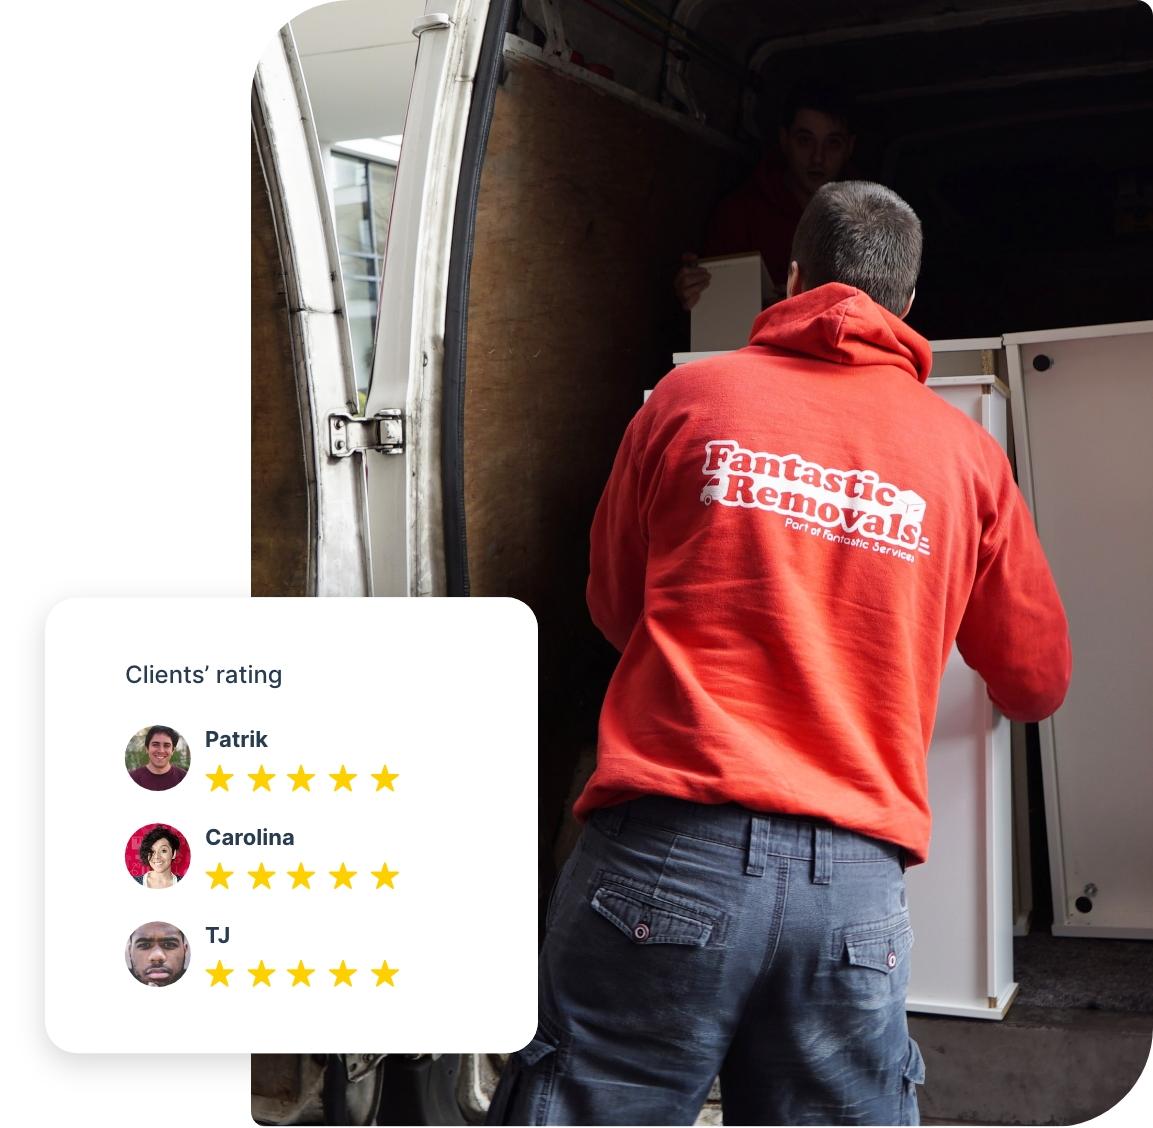 The image shows a Fantastic Services removals specialist who is placing a piece of furniture in a van.